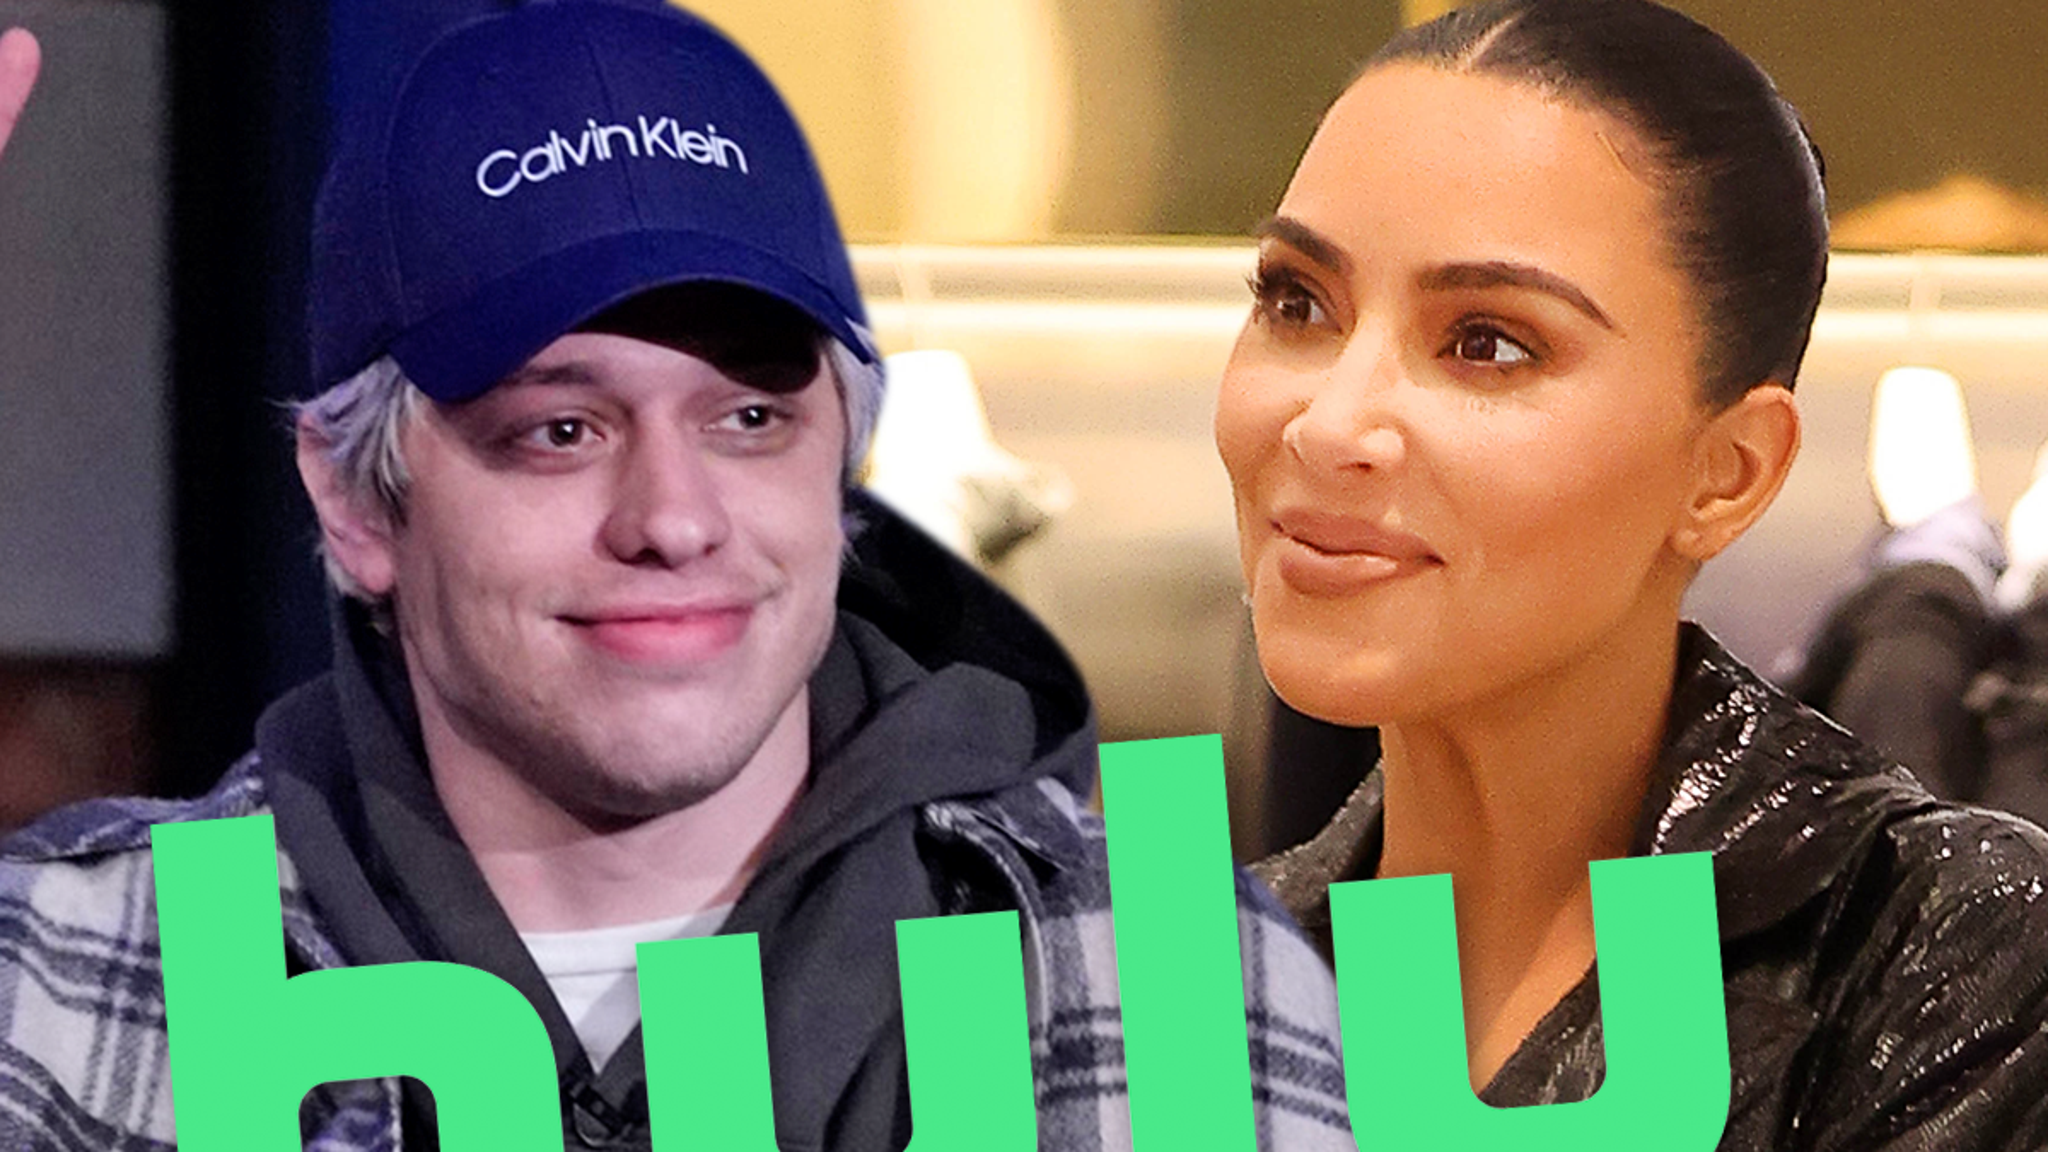 Pete Davidson Will Have to Wait to Appear on Hulu’s ‘The Kardashians’ – TMZ